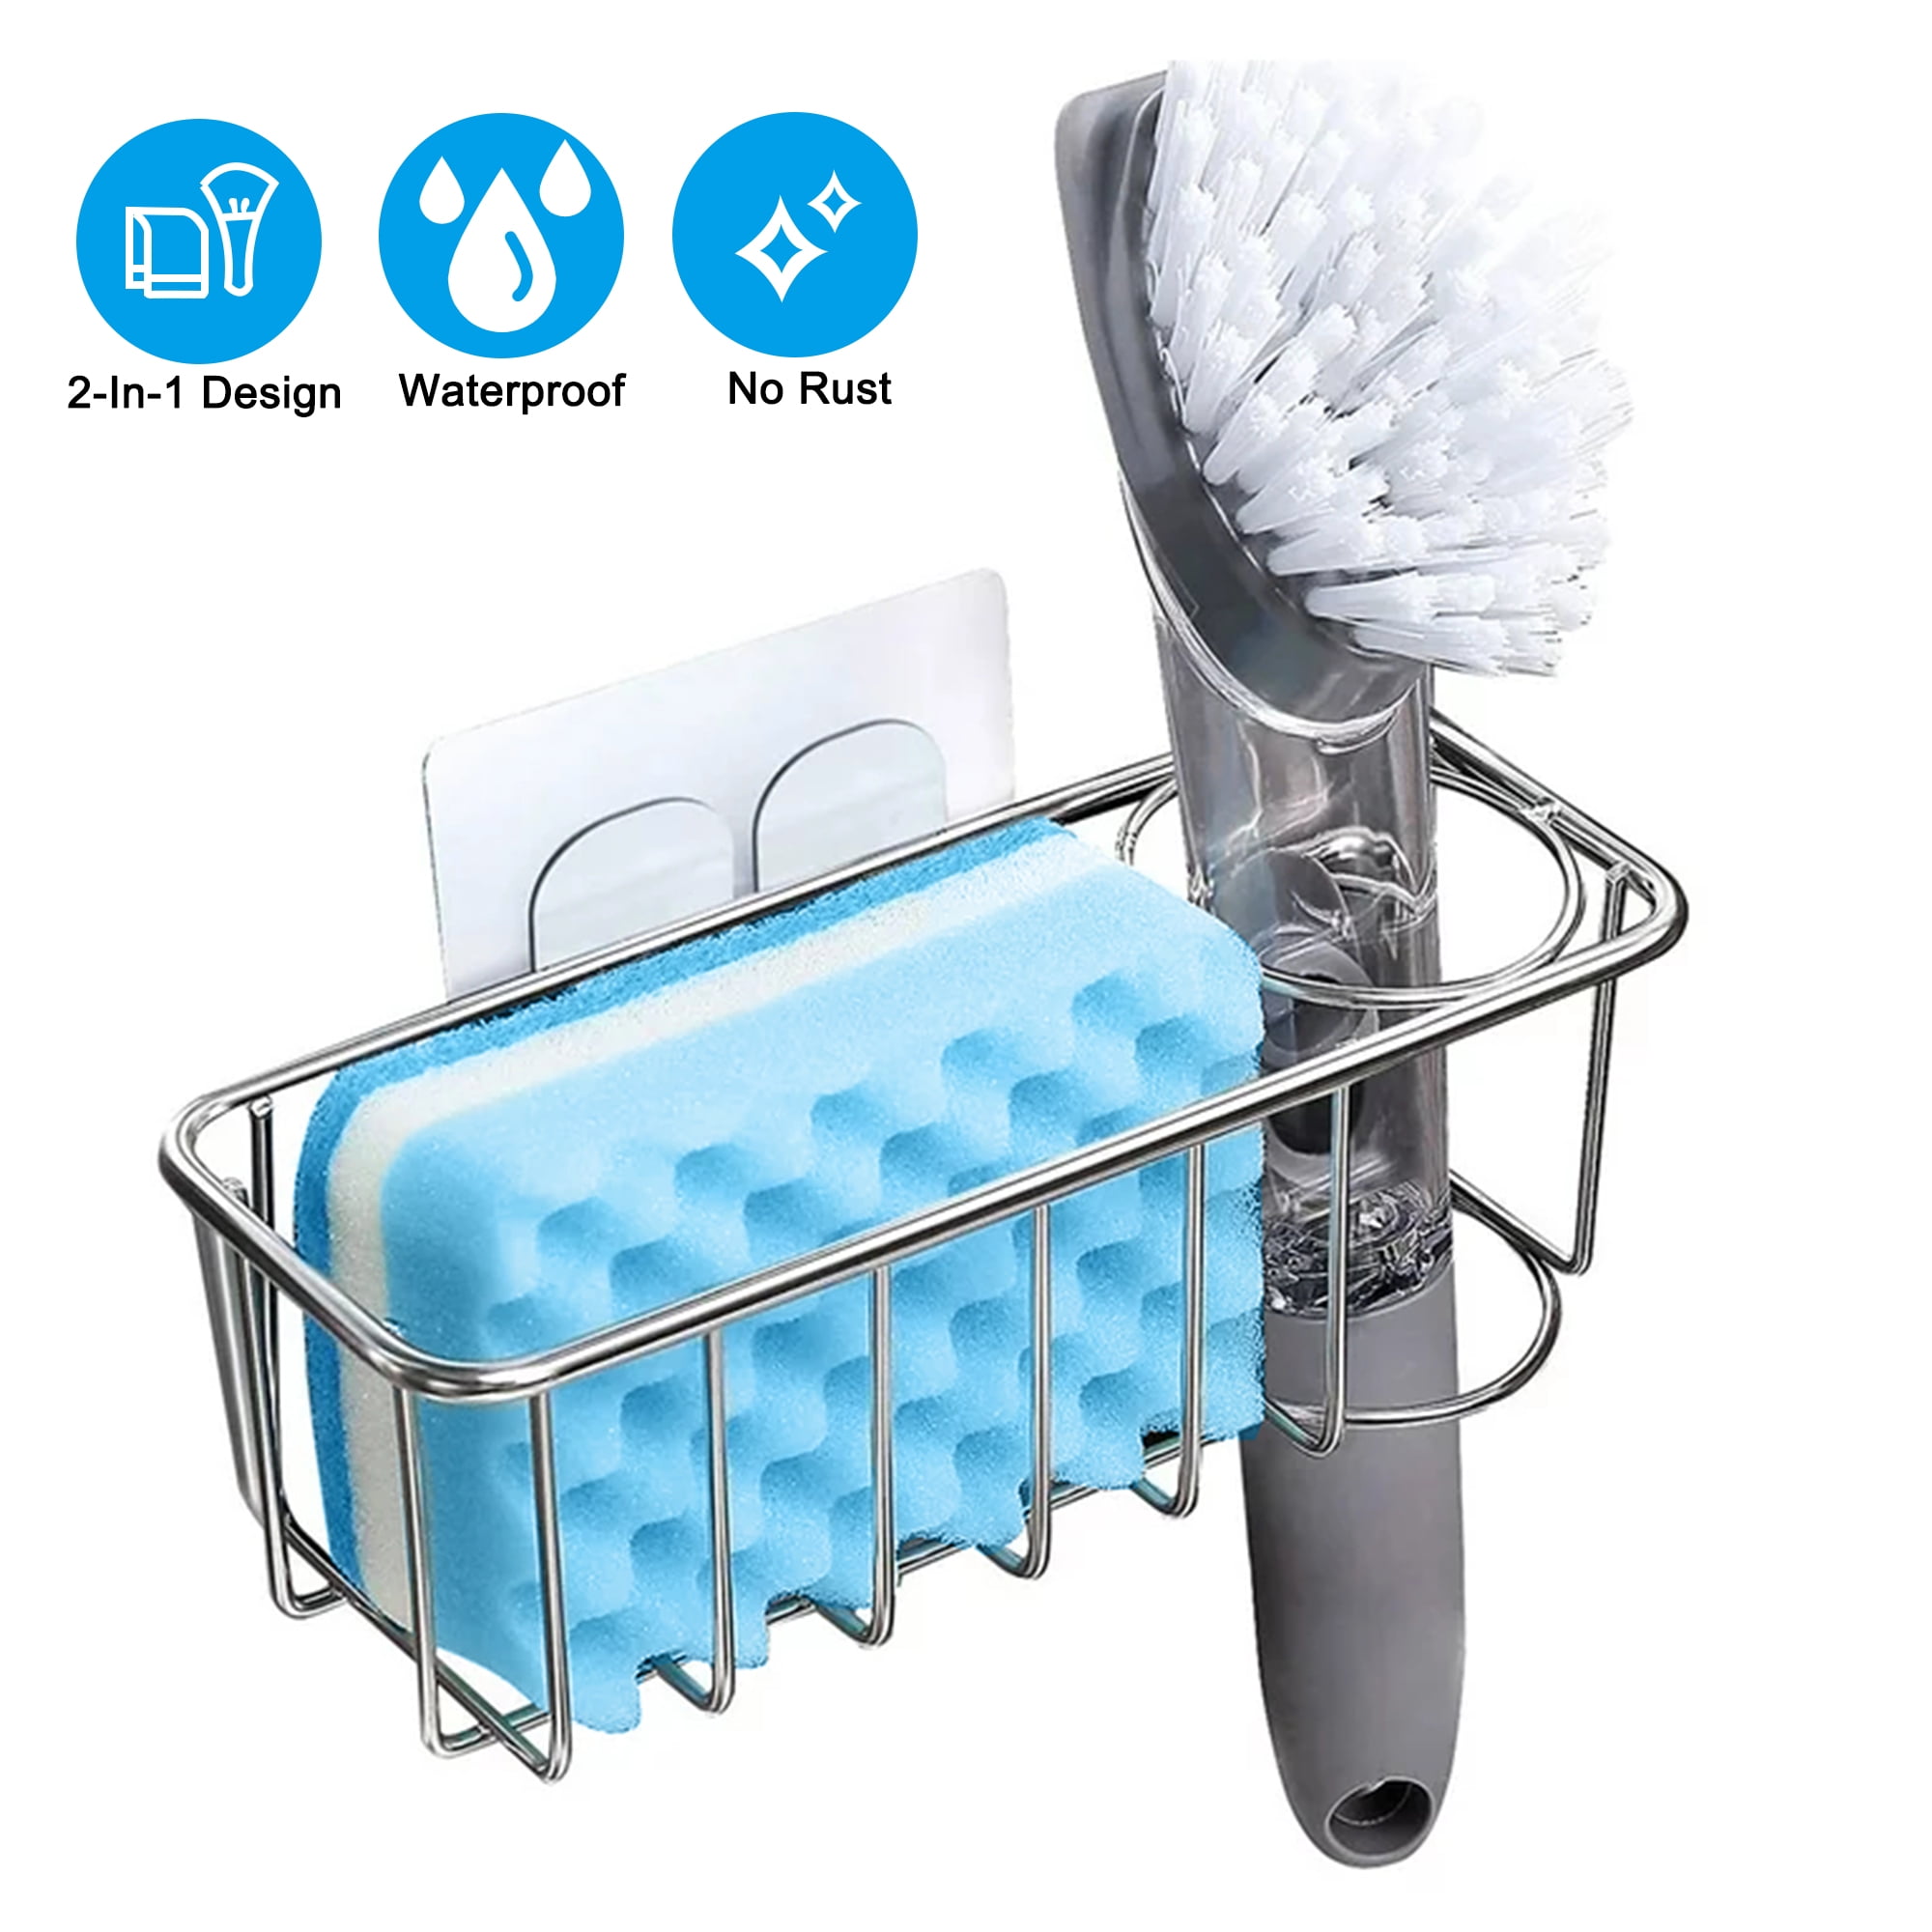 2 Pack Dish Brush Holder, Kitchen Clear Acrylic Sink Caddy Organizer,  Vertical Scrub Brush Holder - Secure Suction Seals to Kitchen Sink(Clear)